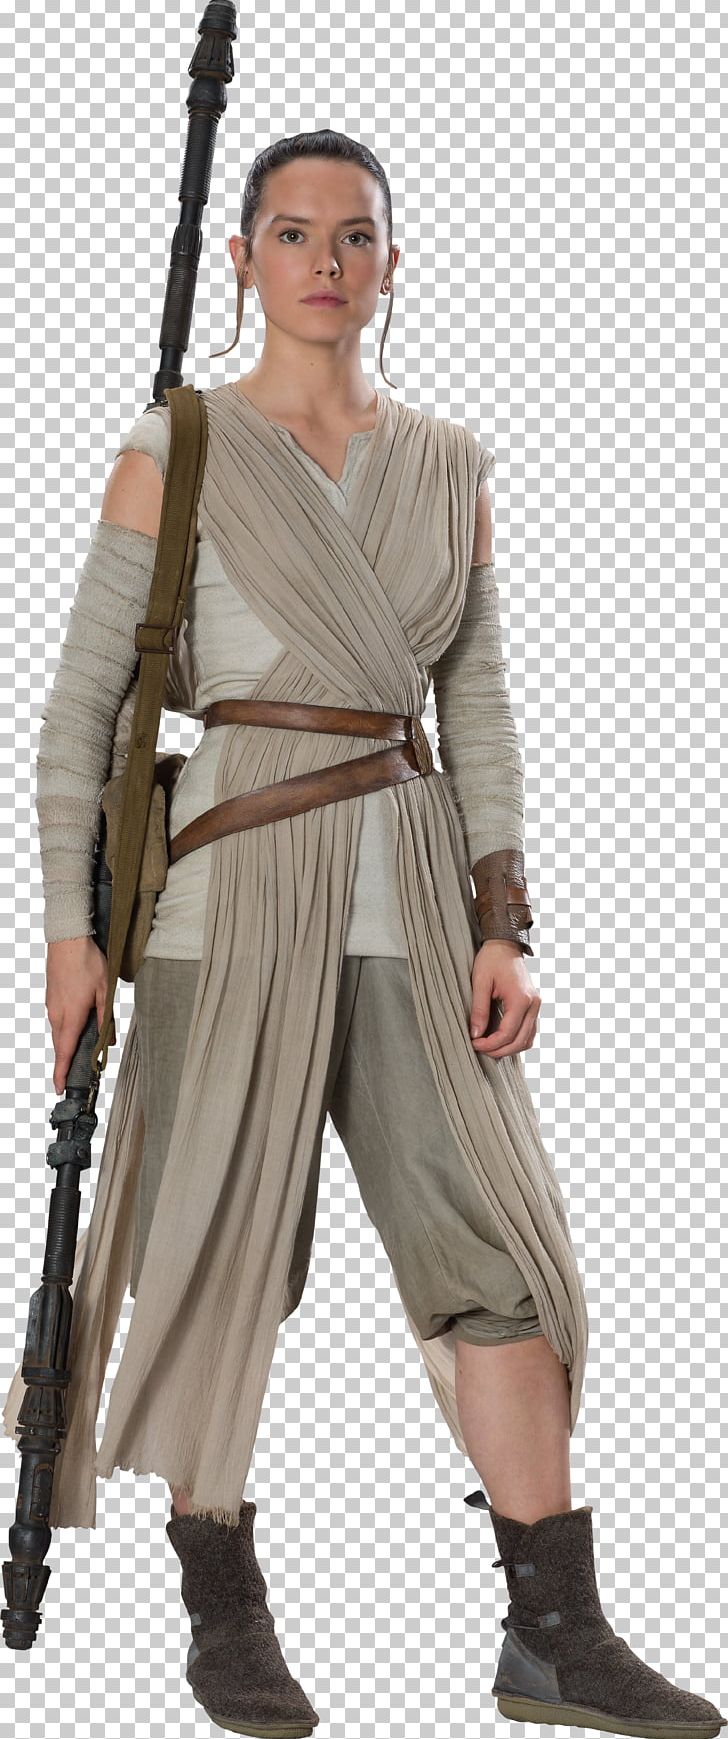 Rey Star Wars: The Last Jedi Daisy Ridley Stormtrooper Kylo Ren PNG, Clipart, Bb8, Cartoon, Chewbacca, Cold Weapon, Costume Free PNG Download